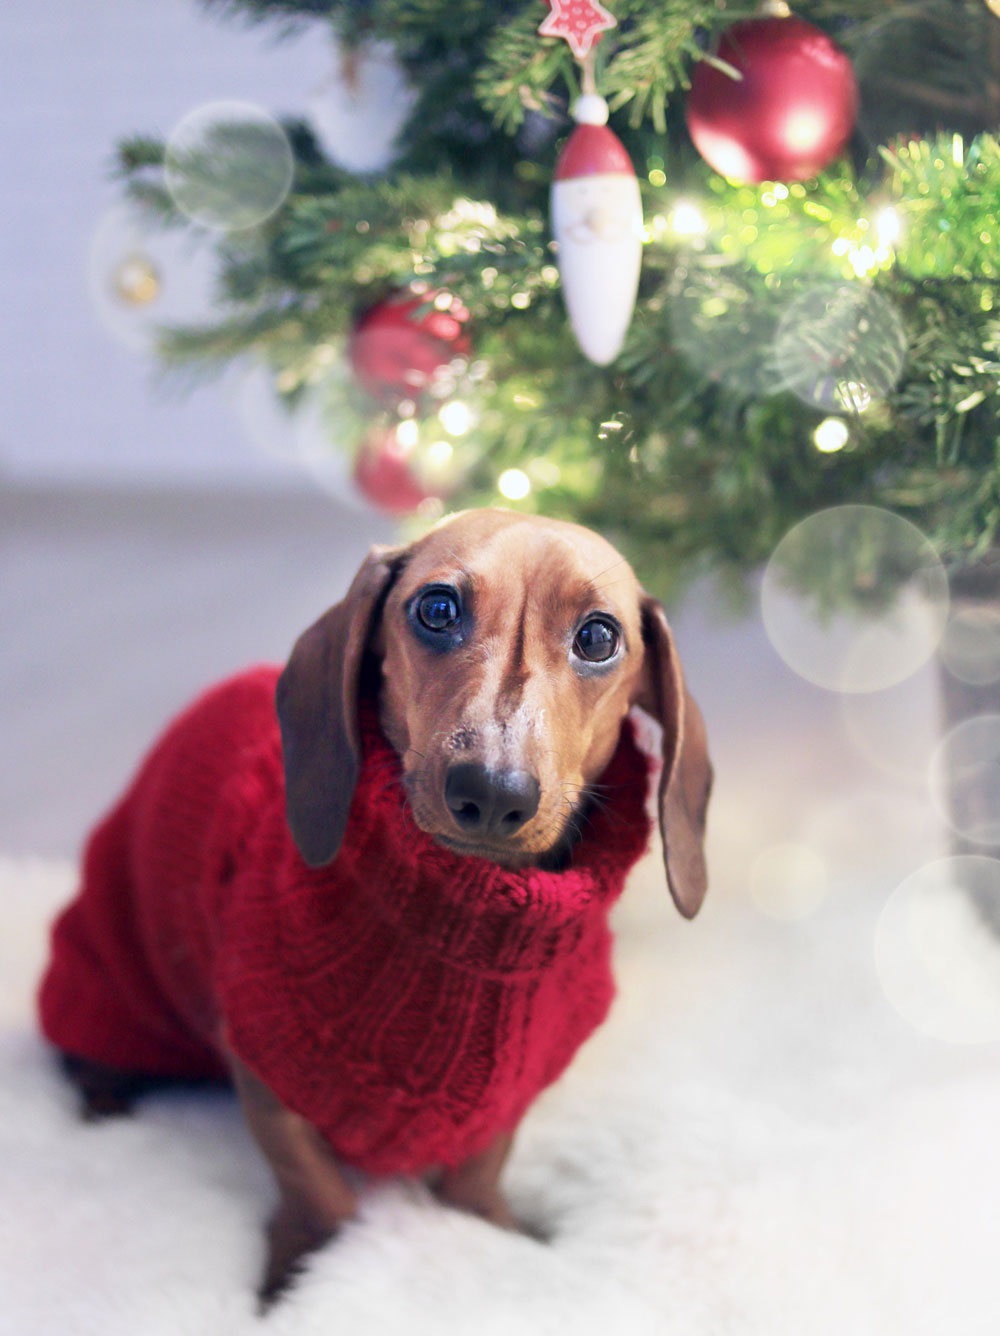 dachshund-dog-wearing-a-red-sweater-755380